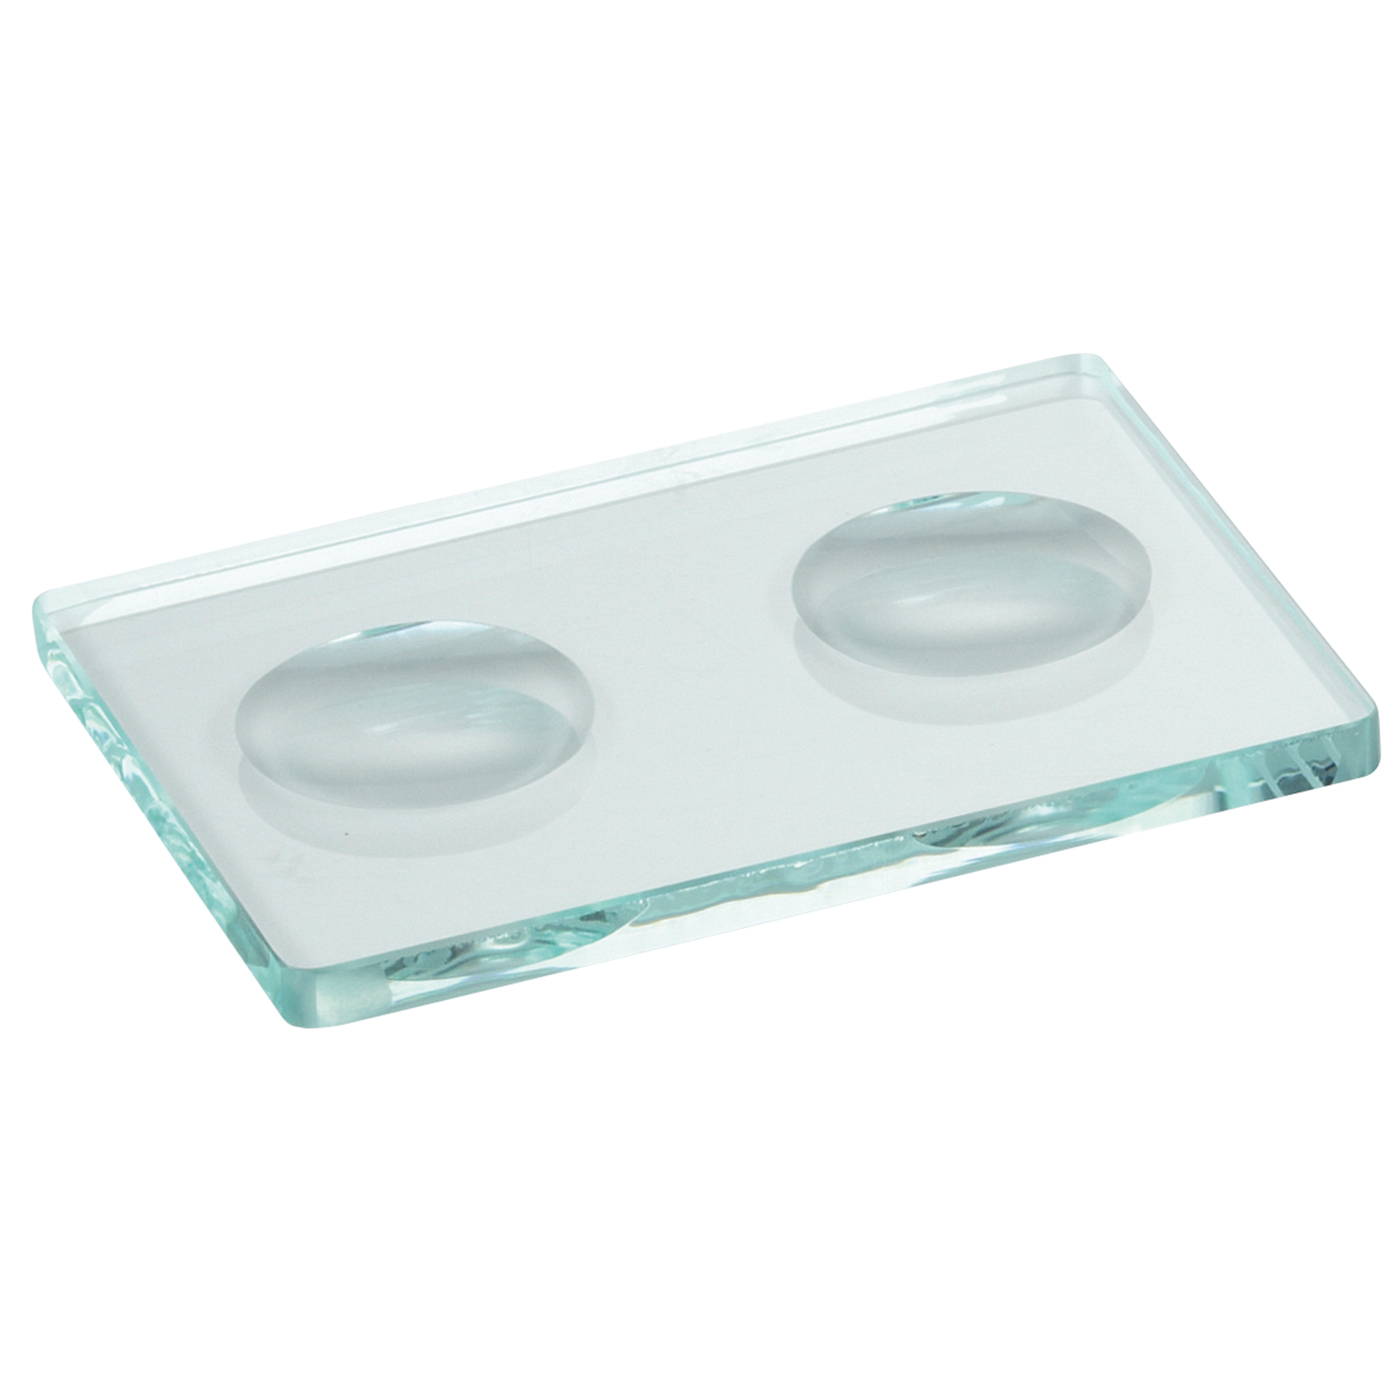 Colorit Glass Mixing Slab - 1 piece